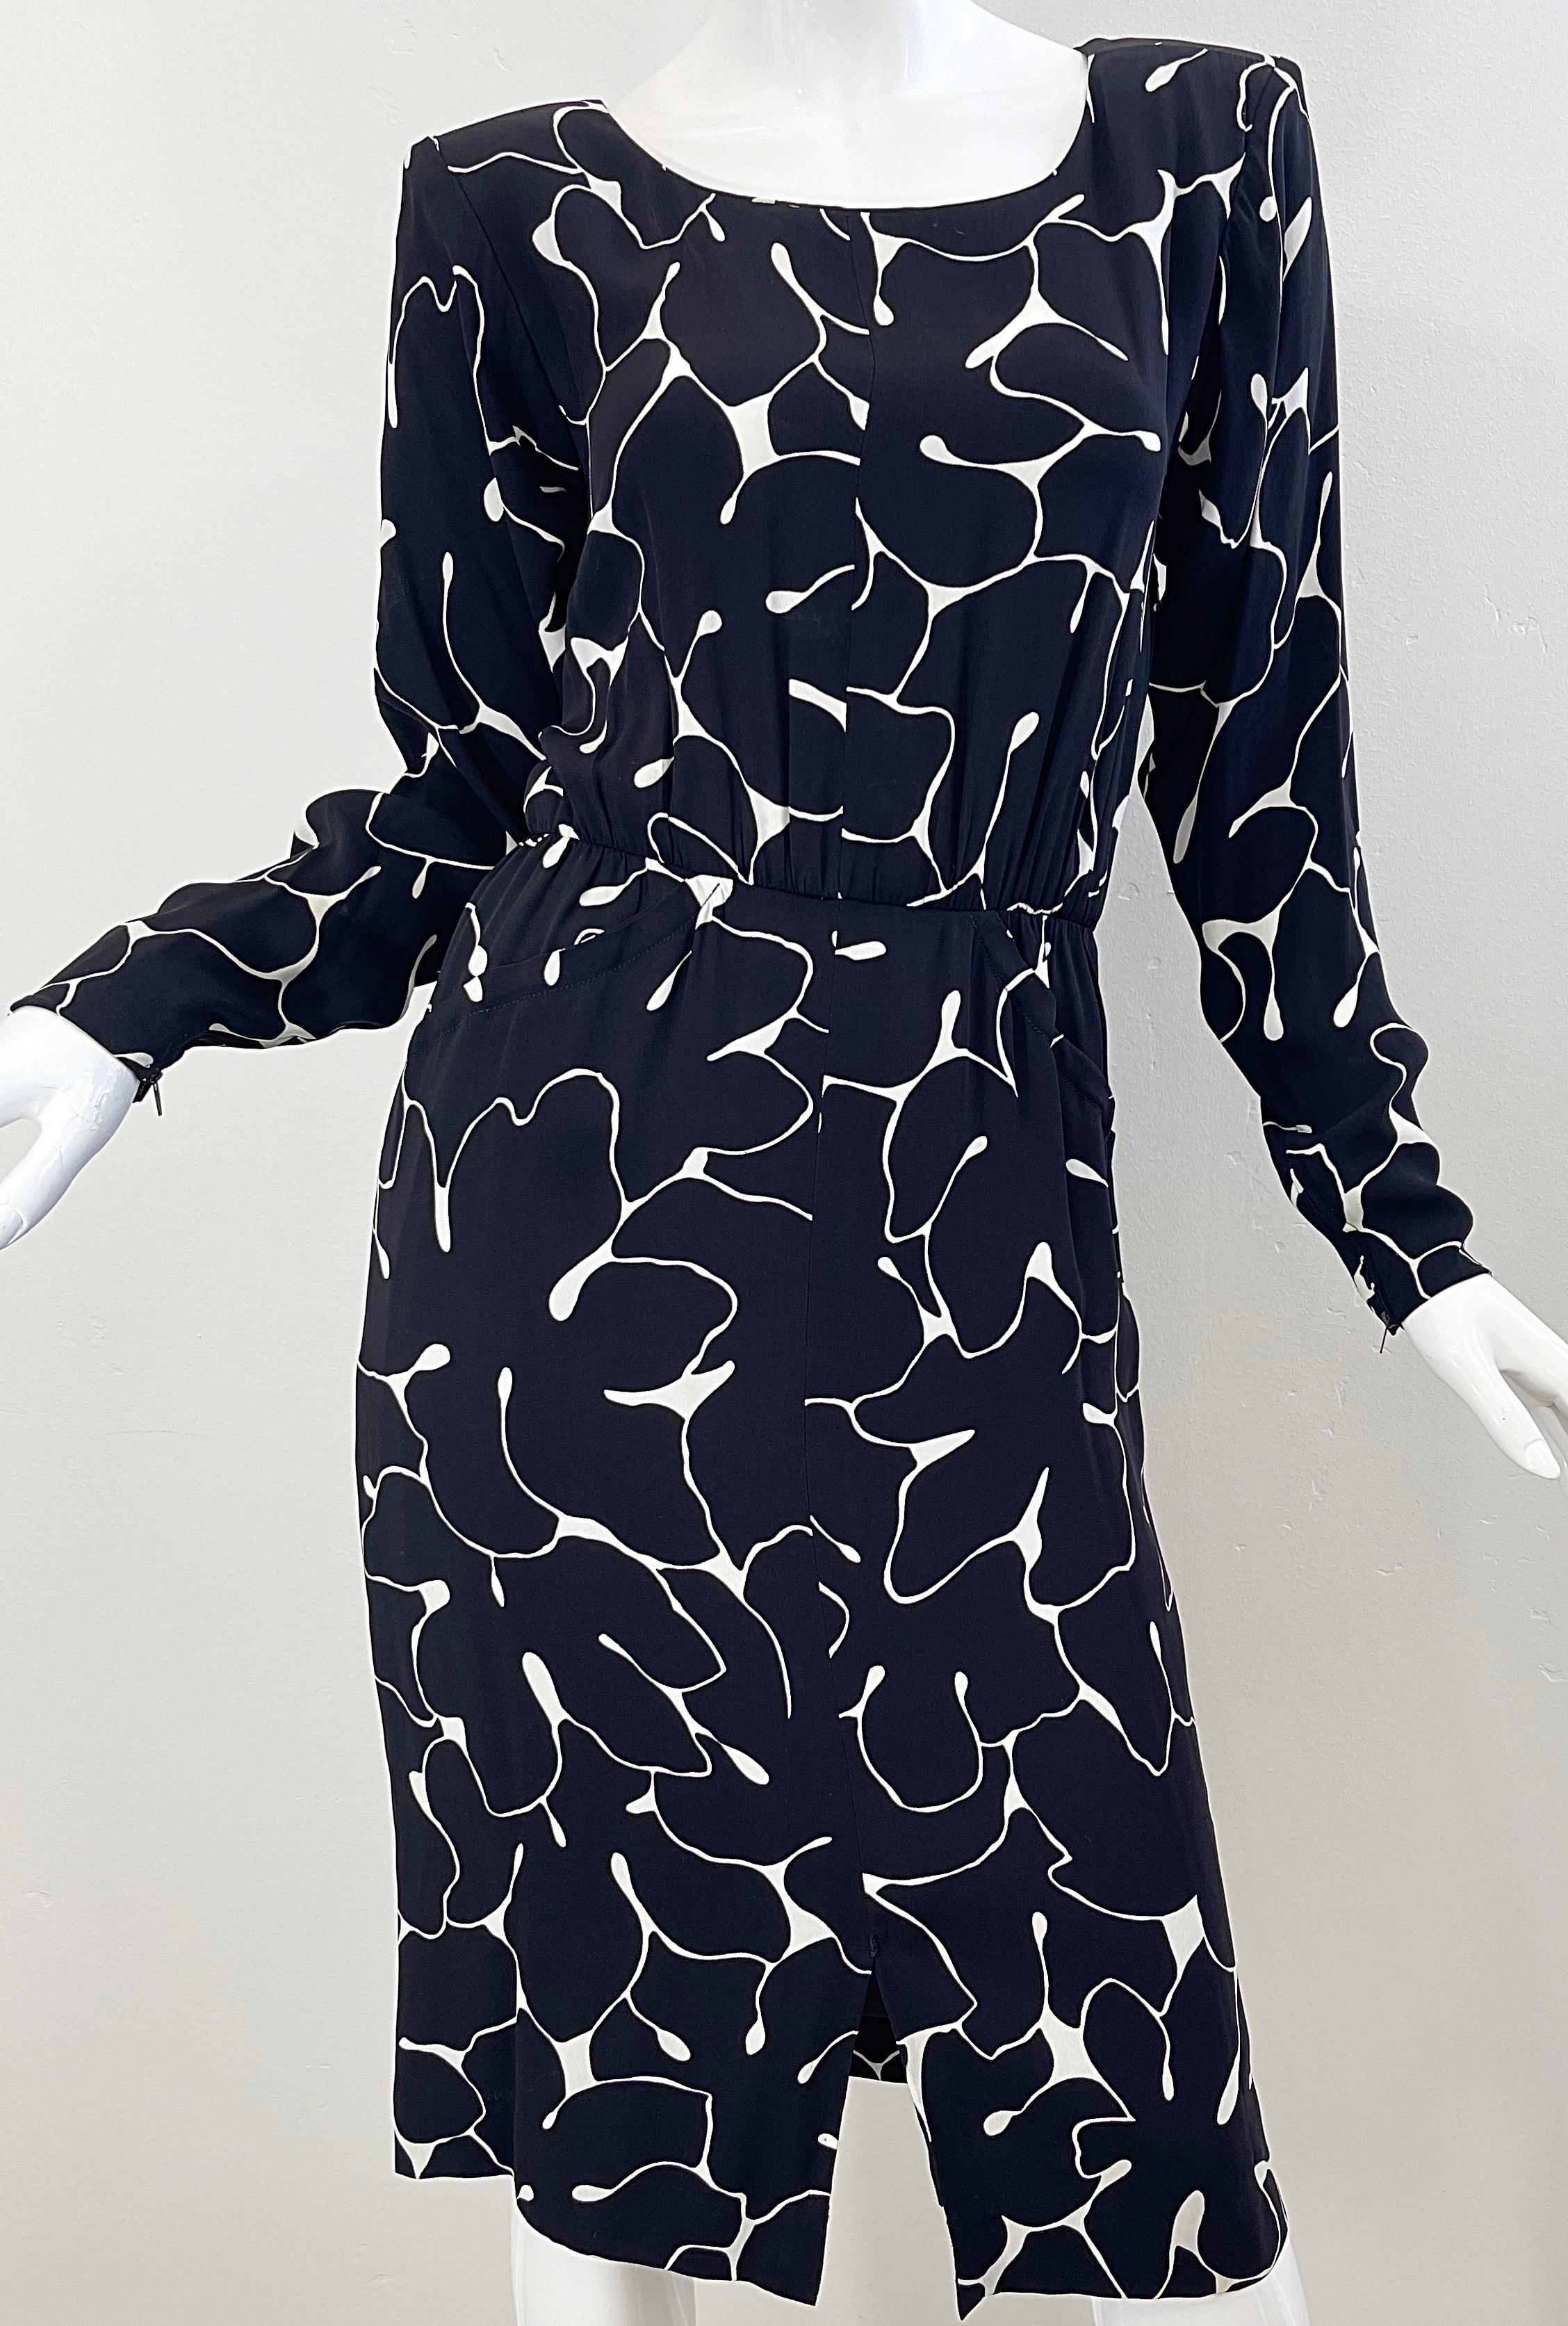 Yves Saint Laurent 1980s Black and White Abstract Flower Print Silk Crepe Dress For Sale 6